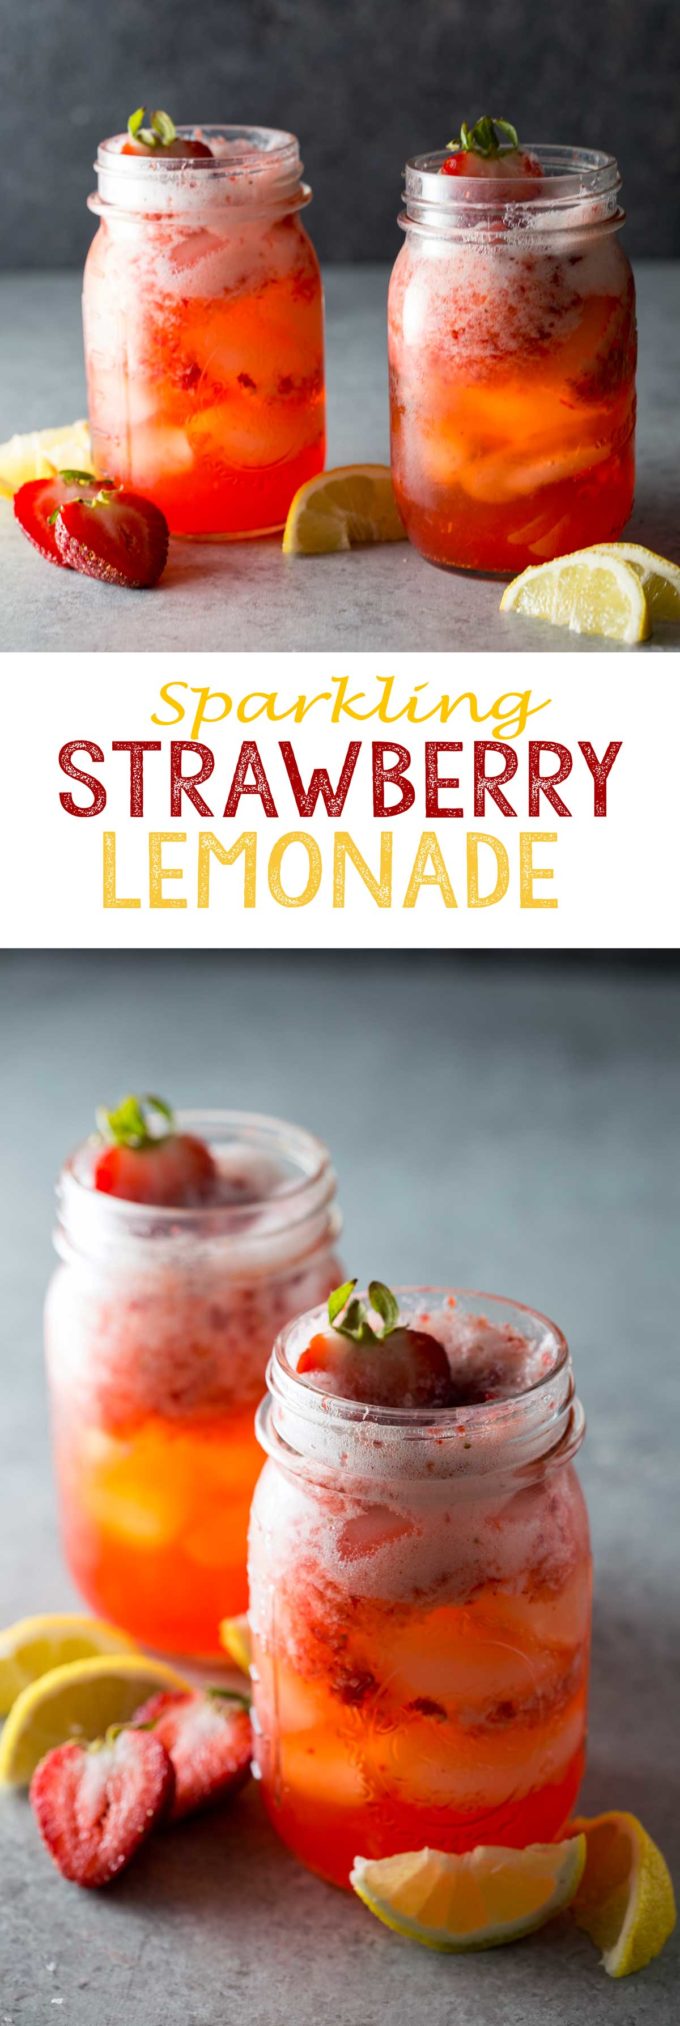 Sparkling Strawberry Lemonade is easy and refreshing on a hot summer day!